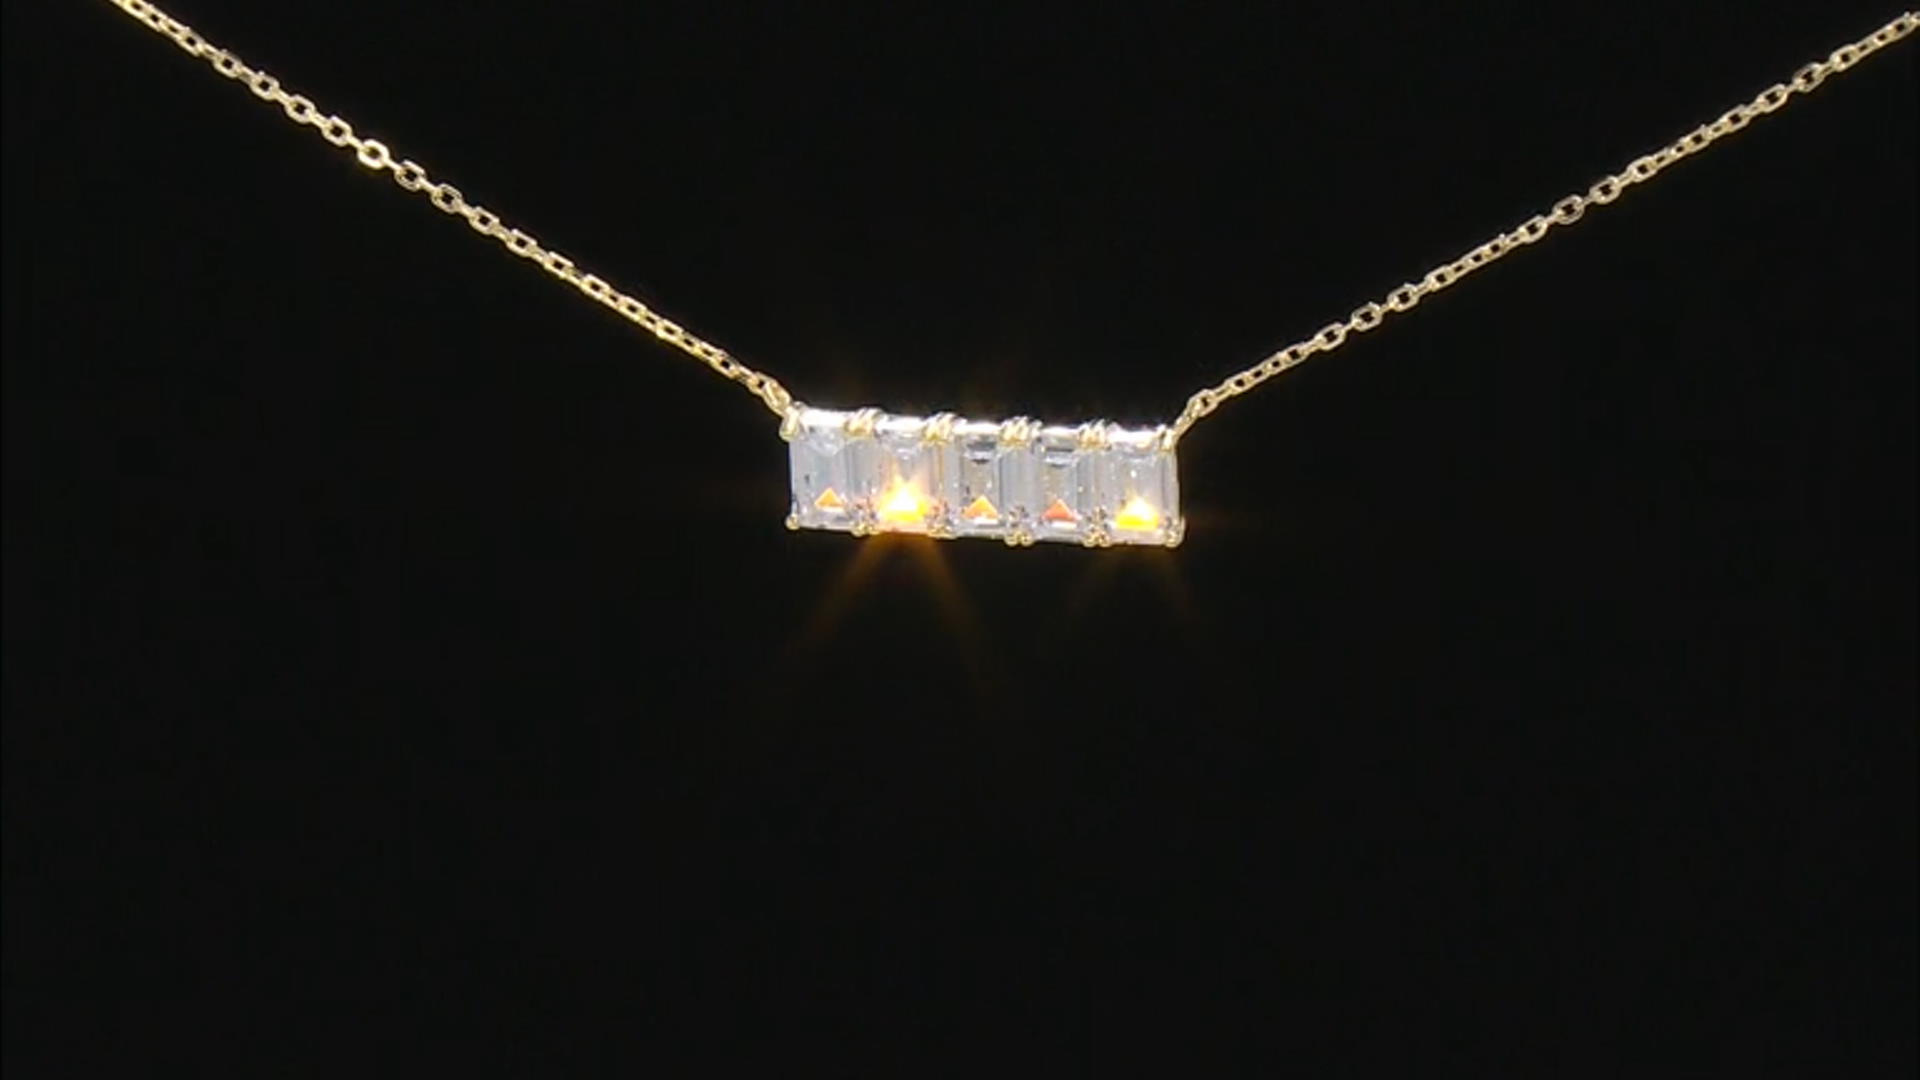 White Cubic Zirconia 18k Yellow Gold Over Sterling Silver Bar Necklace 4.98ctw Video Thumbnail